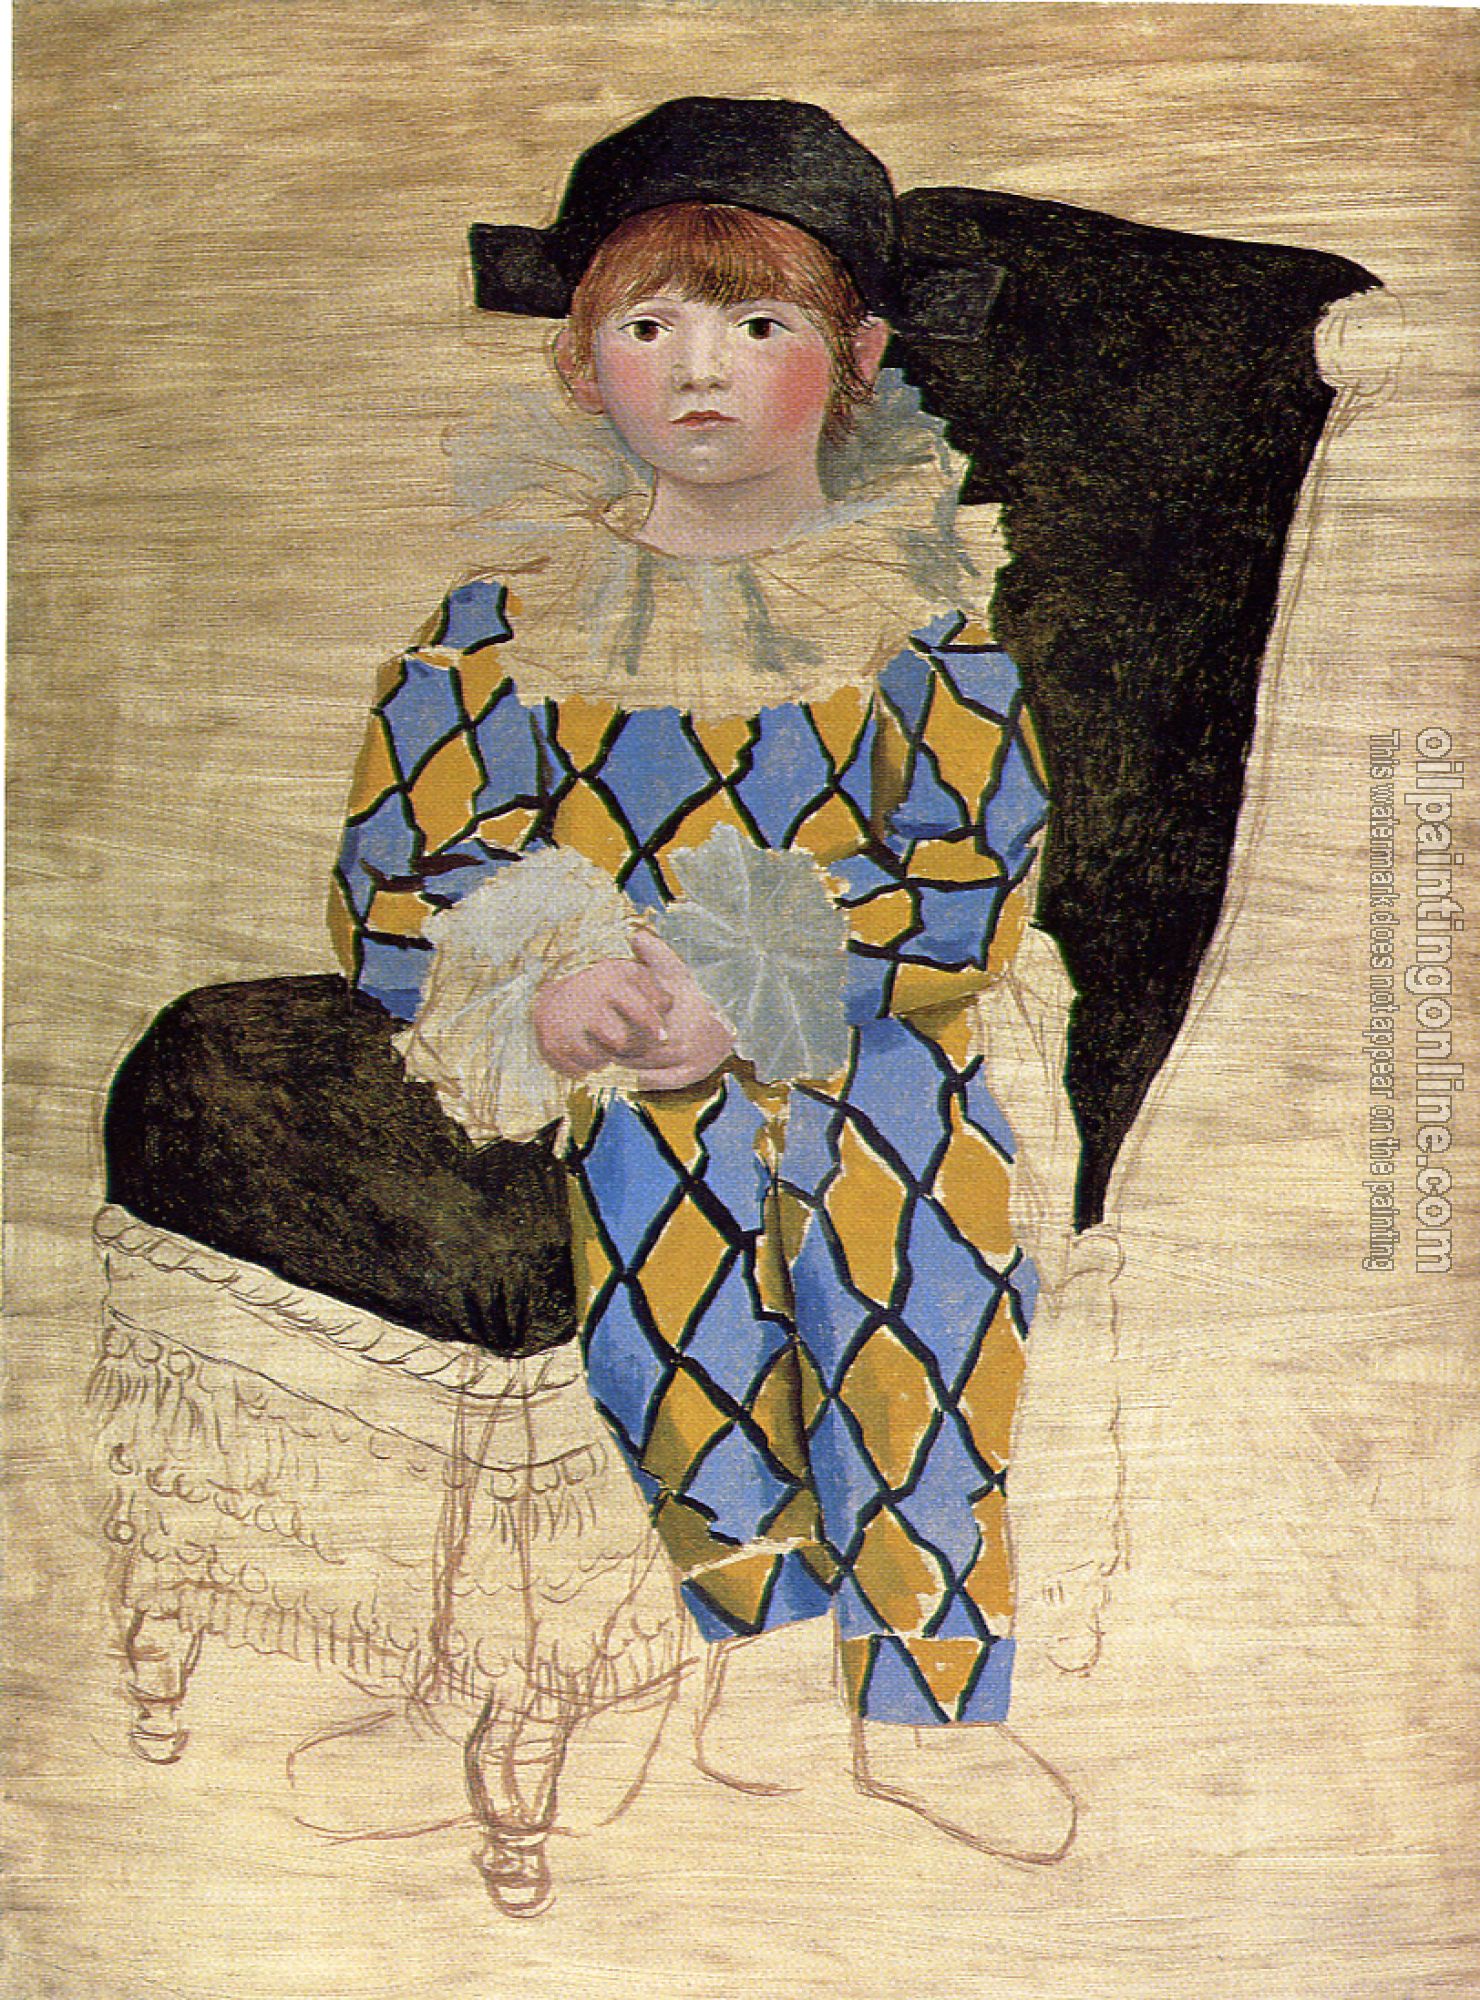 Picasso, Pablo - paulo as harlequin